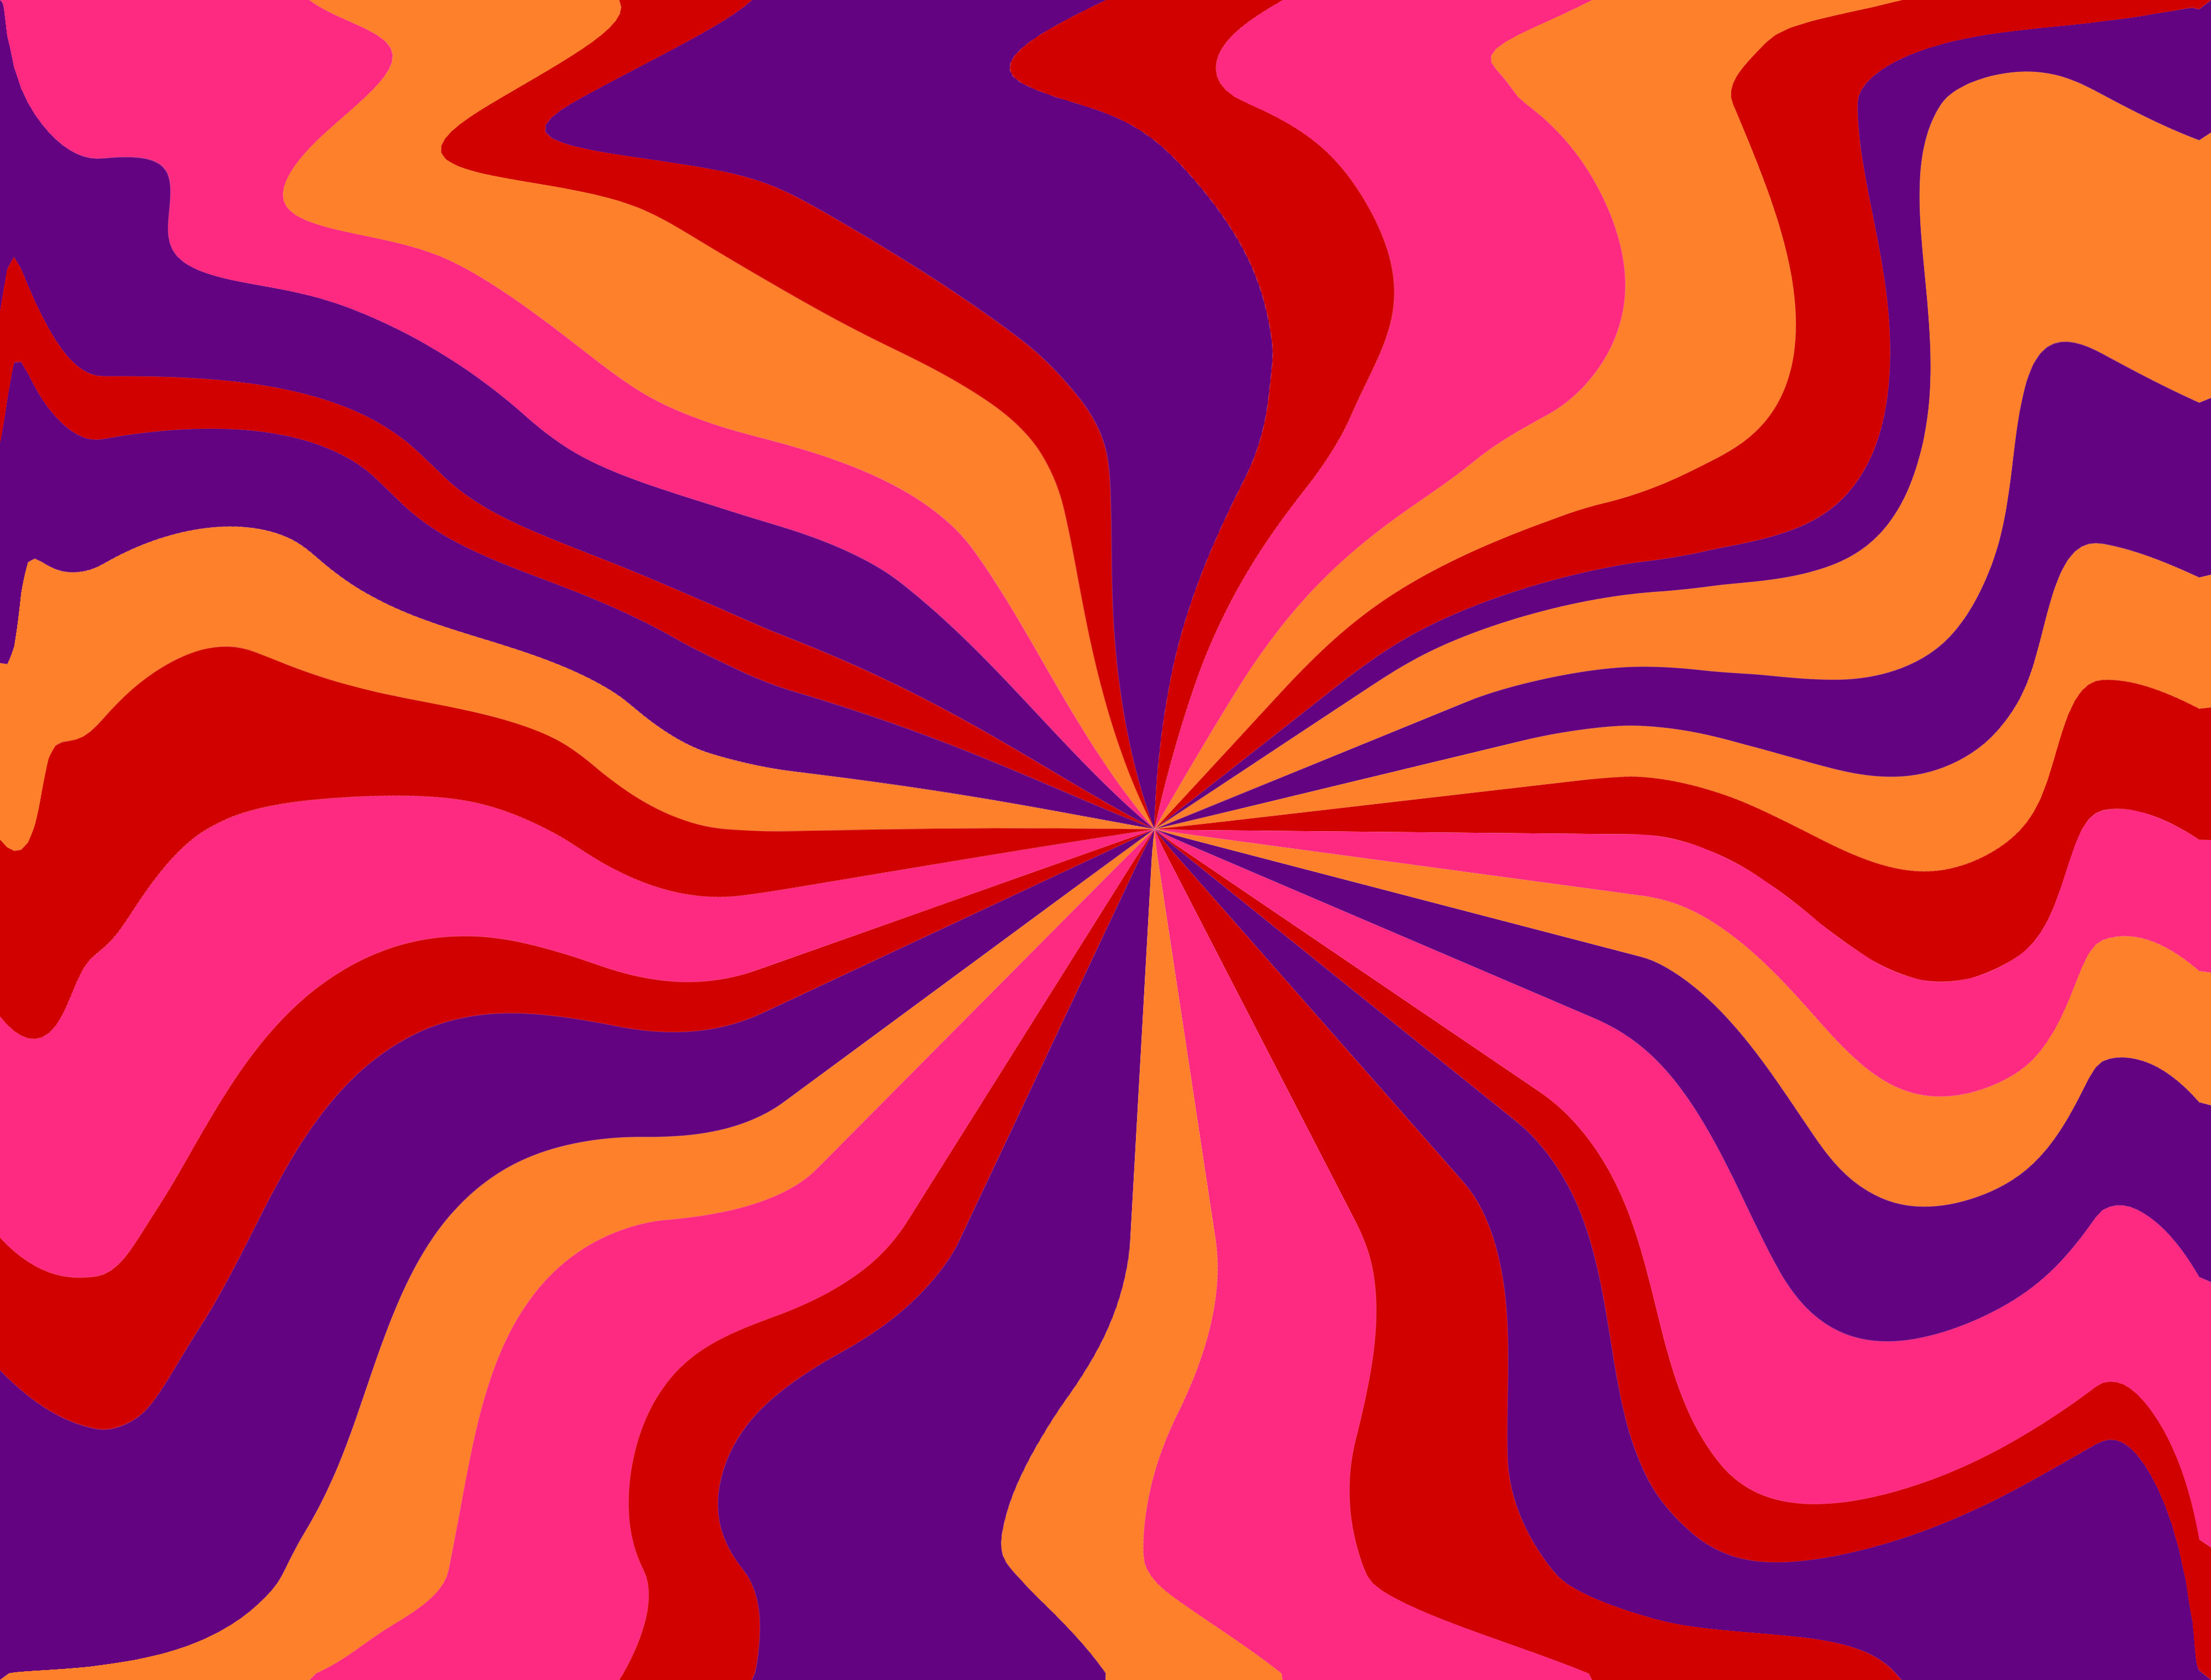 Psychedelic Groovy Background in Vivid Colors (JPG) .